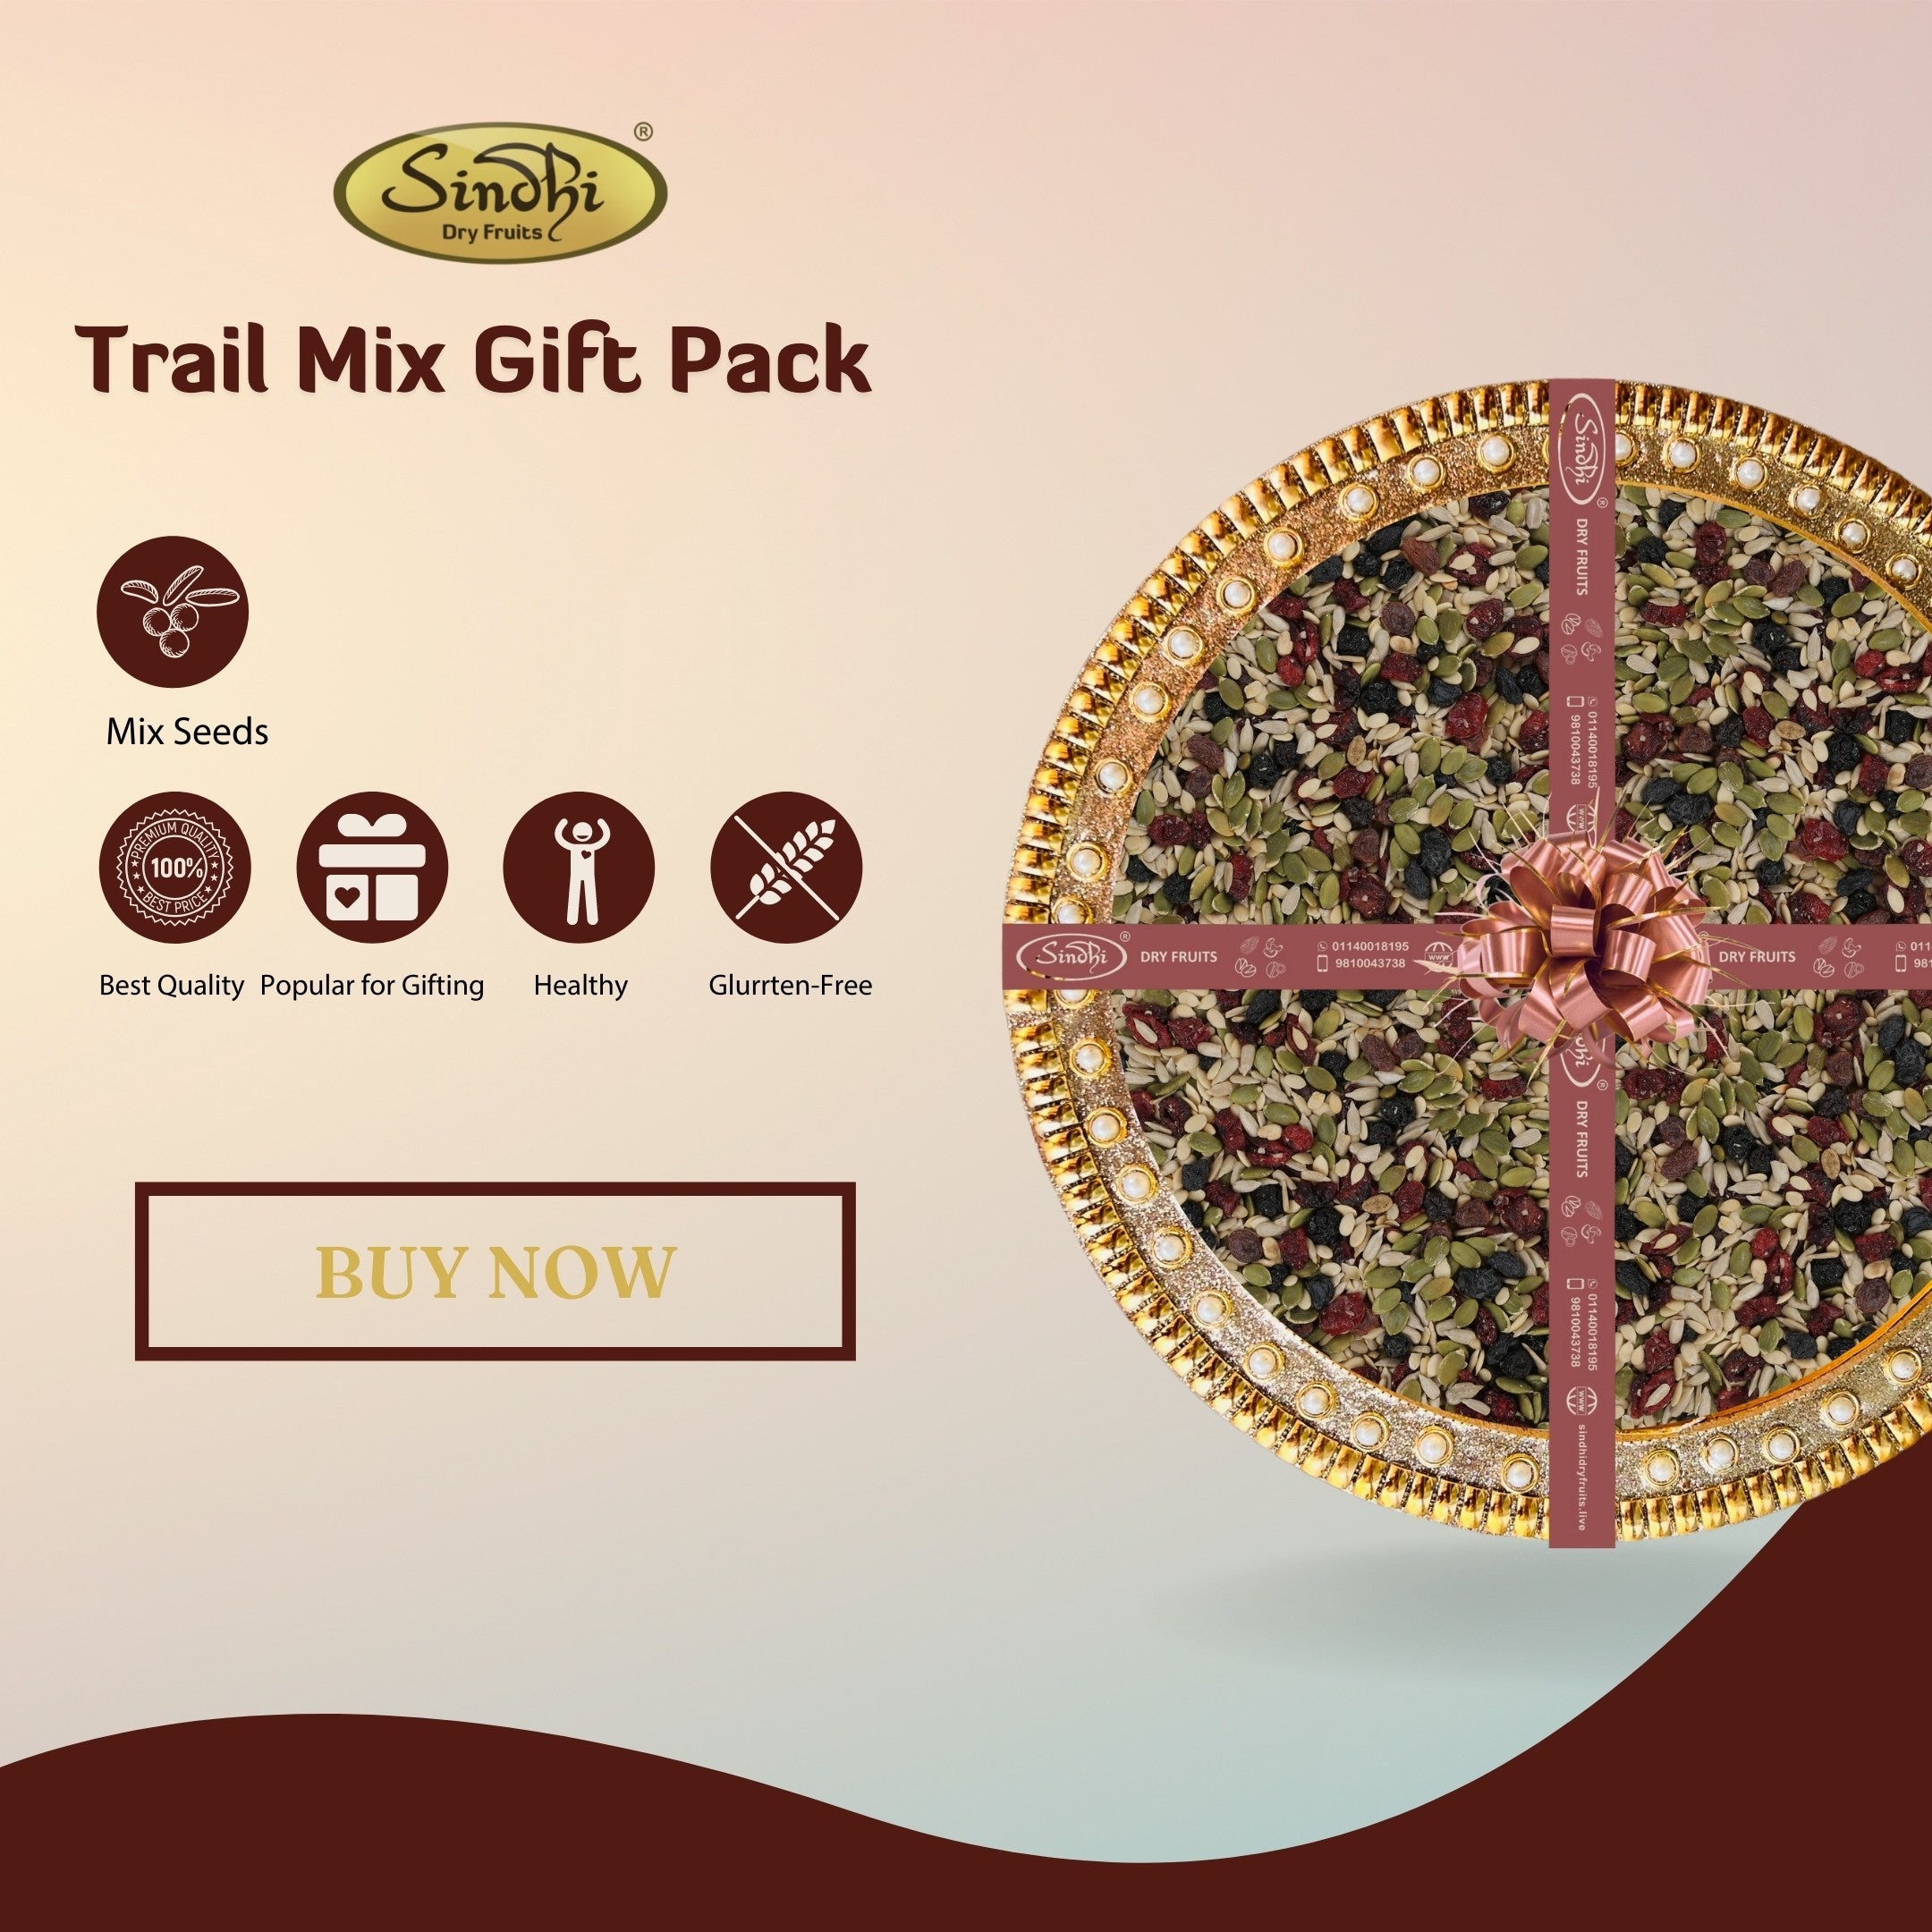 Gift Pack Containing Trail Mix with Seeds and Berries - Sindhi Dry Fruits